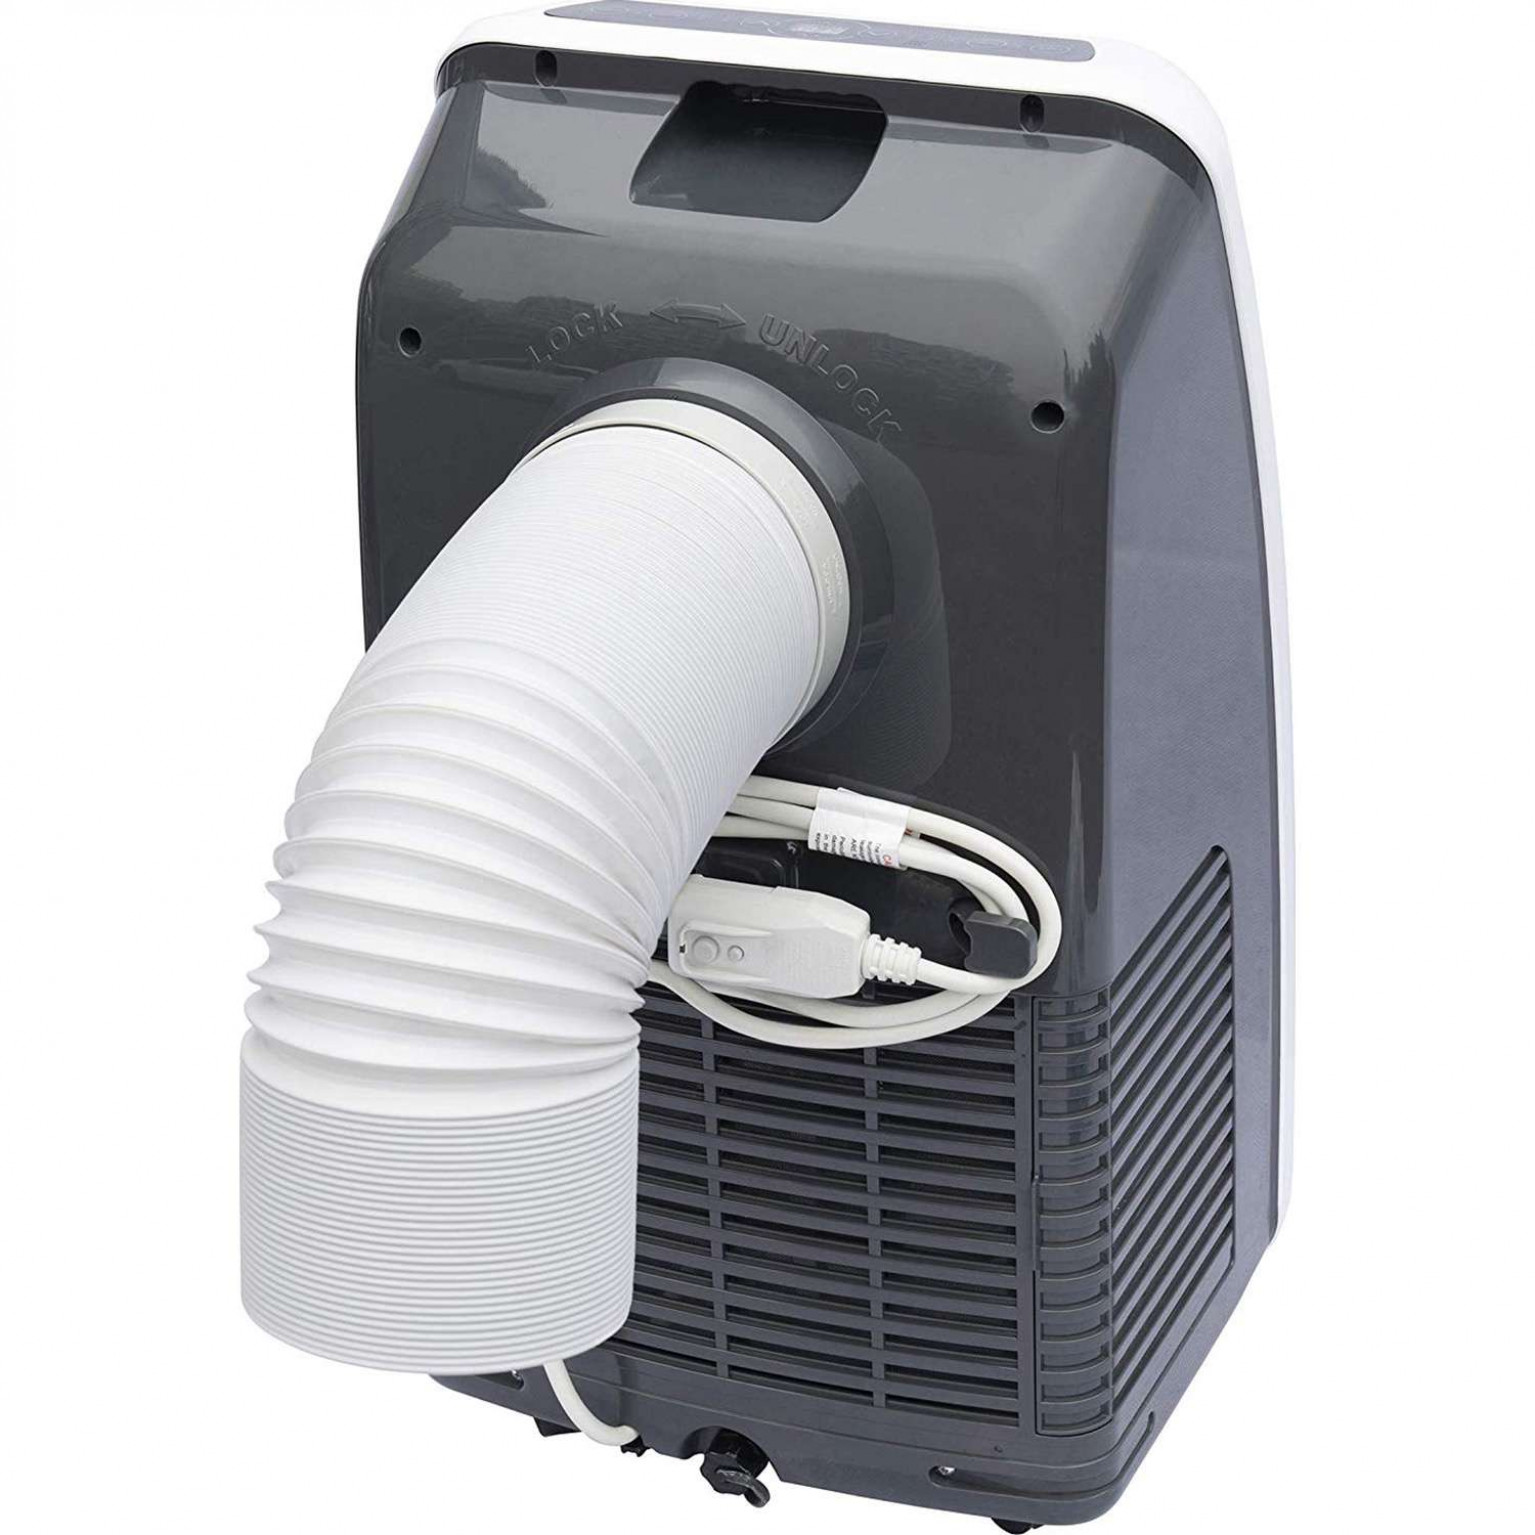 Difference Between Portable Ac And Dehumidifier